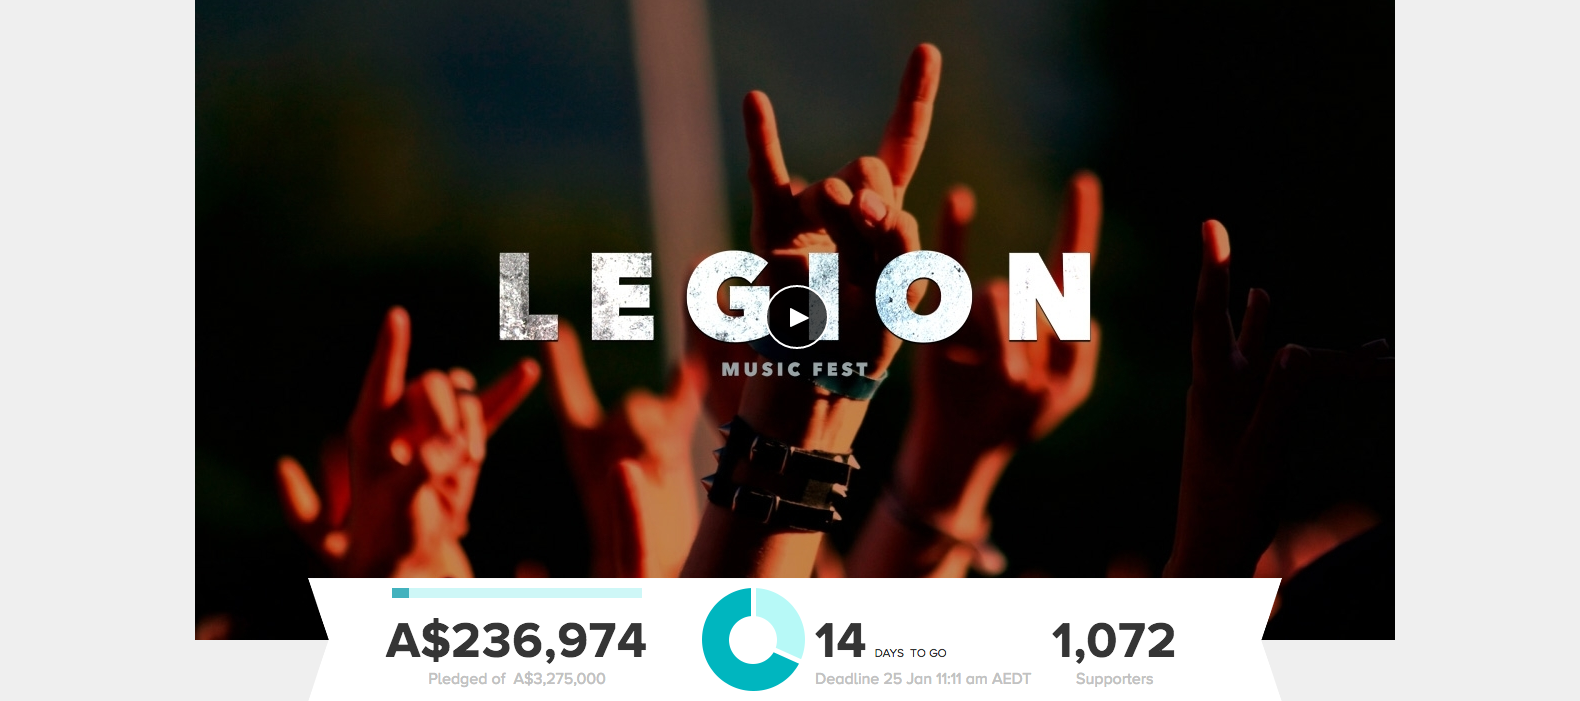 Heavy music fest Legion gets $30k pledges, on track to breaking record